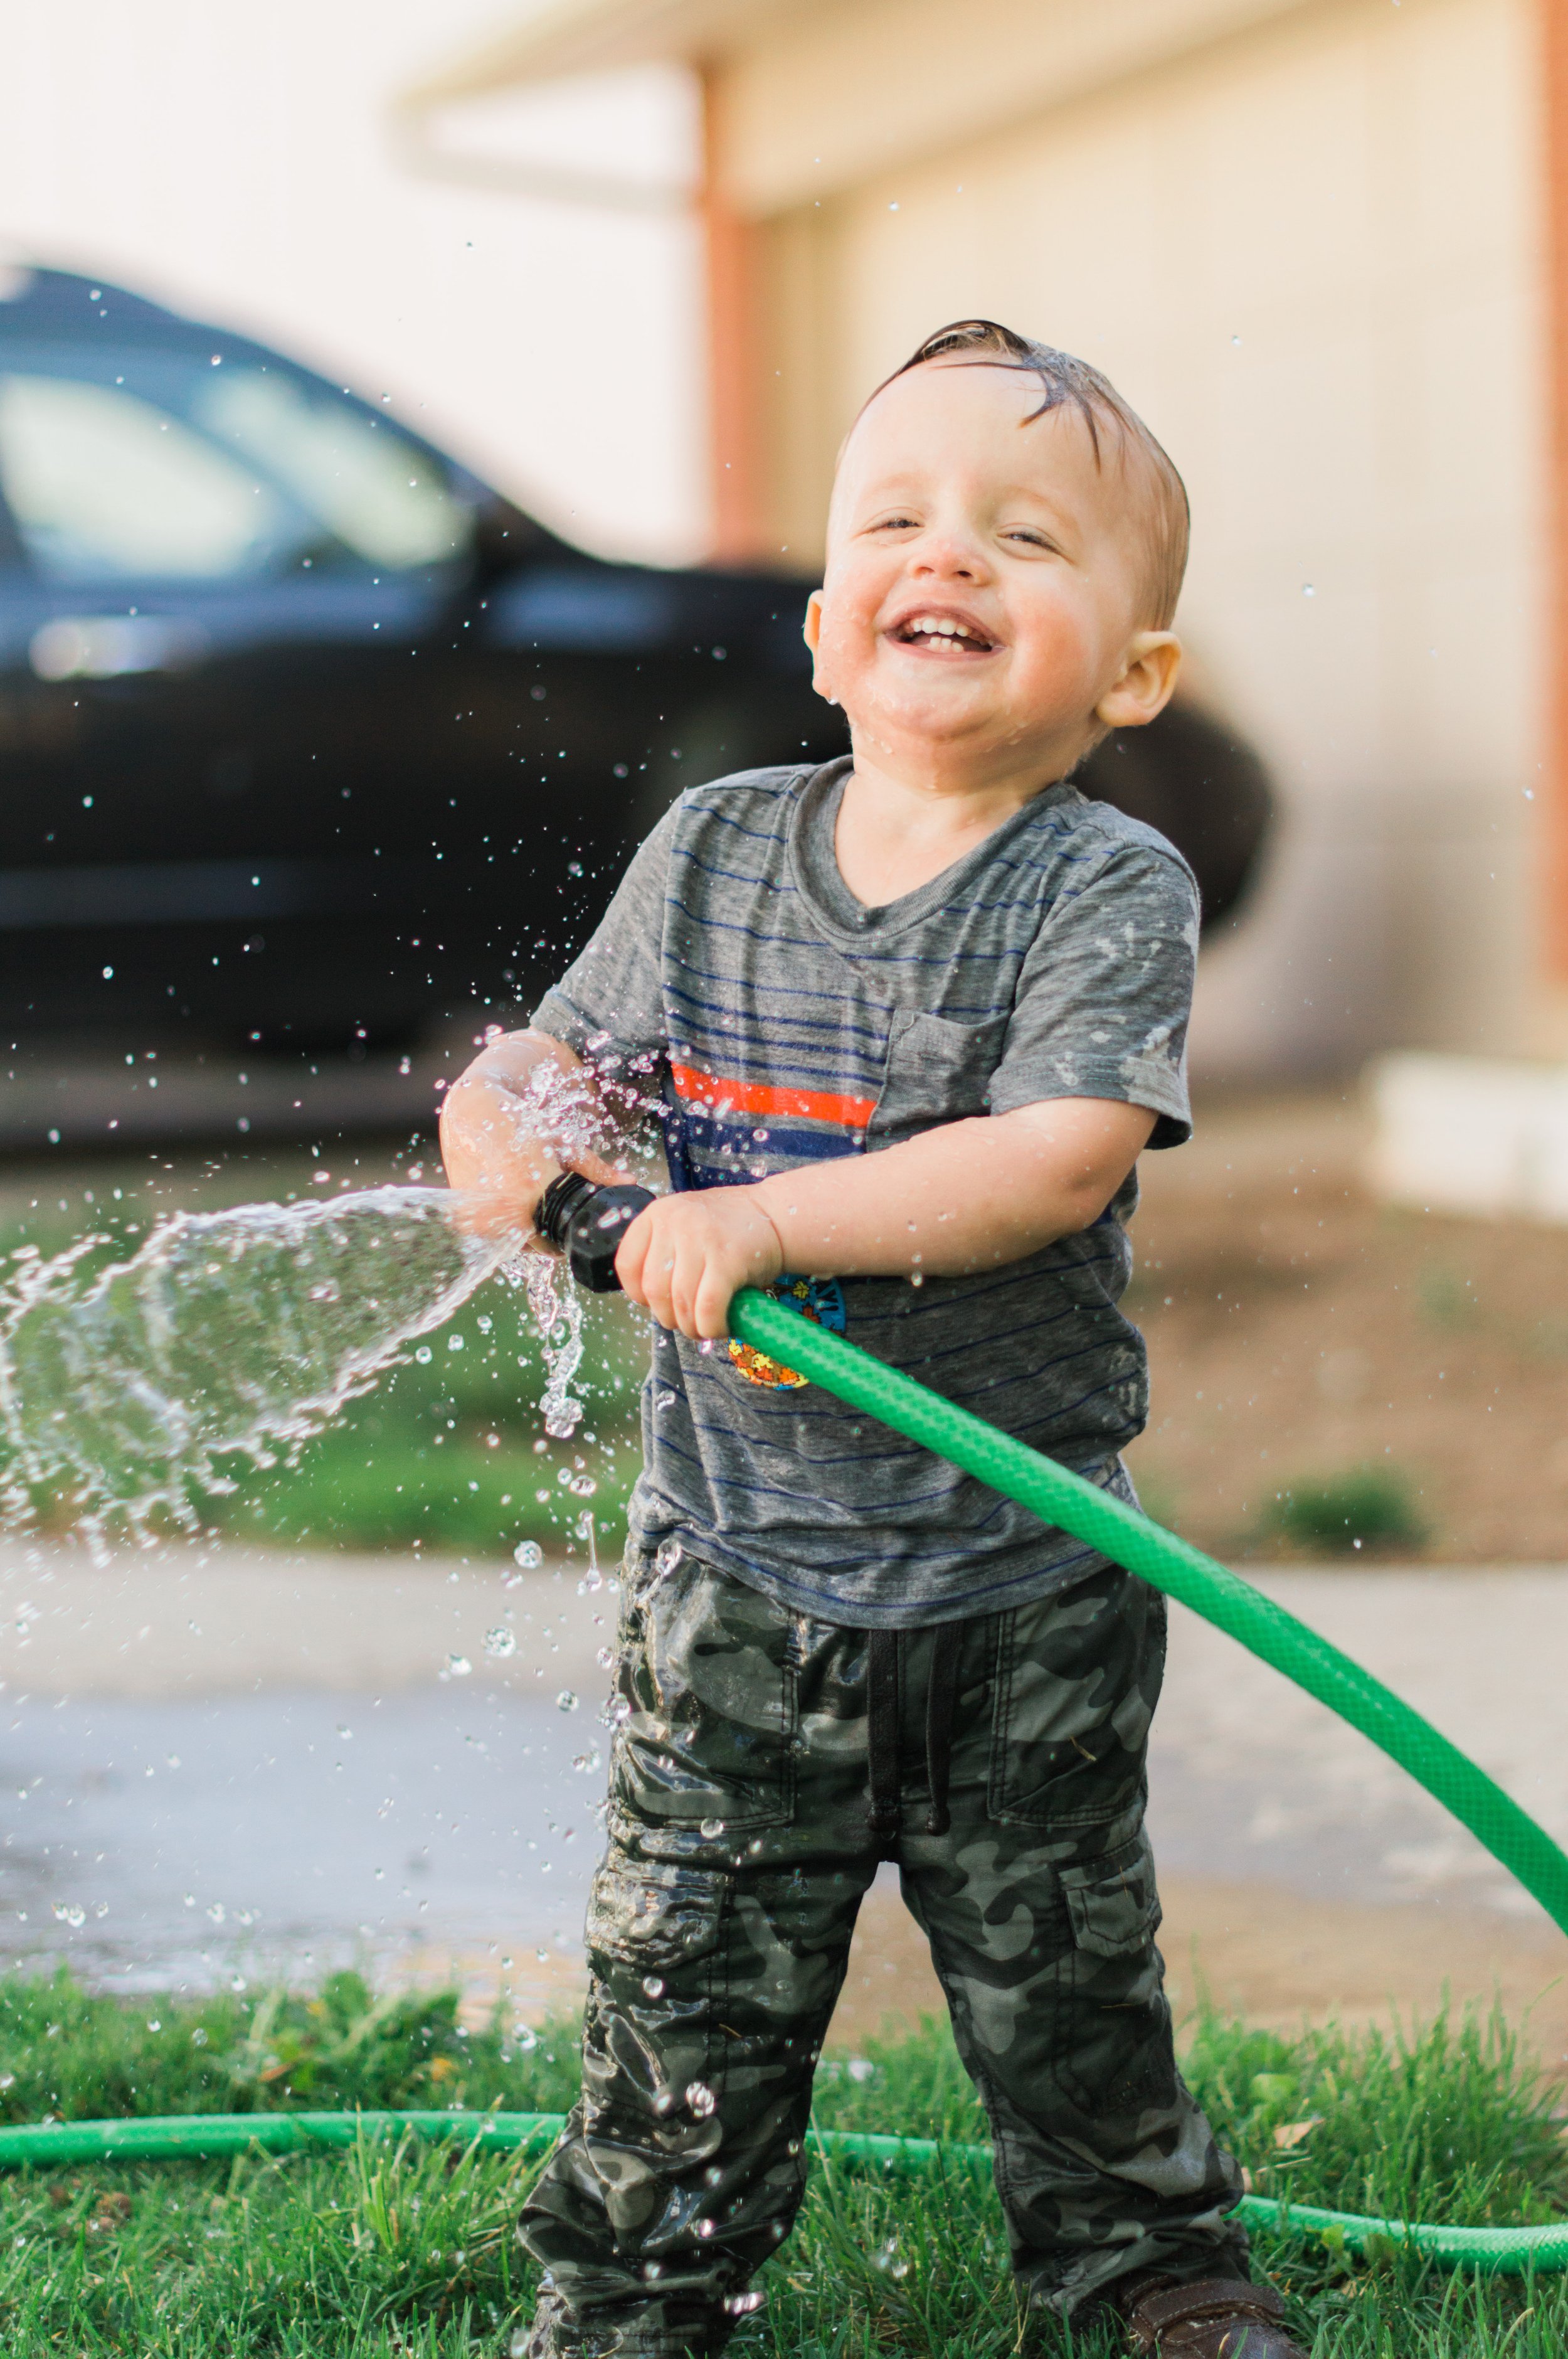  This photo captures the mischief and joy of this boy as he is soaked by a hose on a beautiful summer day as they wash the car. Happy boy cash wash candid shot wet little boy #candidkidsphoto #daddyshelper #midlaugh #summertime #summercarwash #georgi